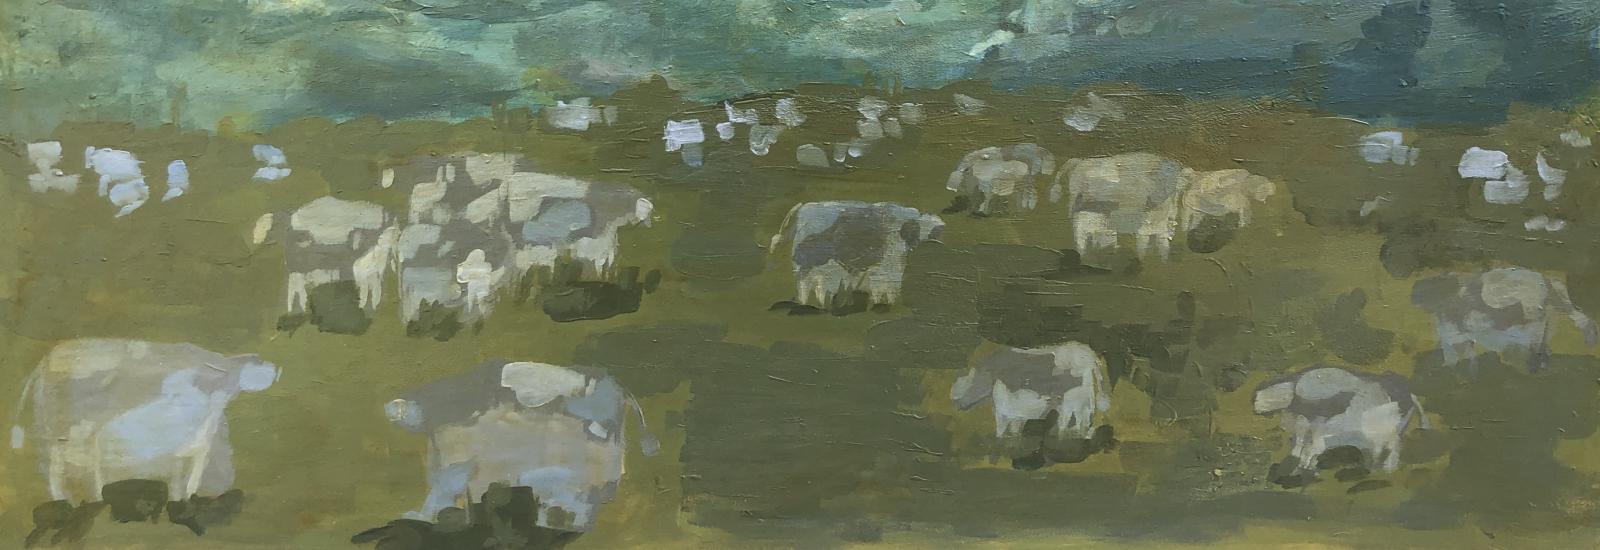 Painting of livestock in a field under cloudy skies.